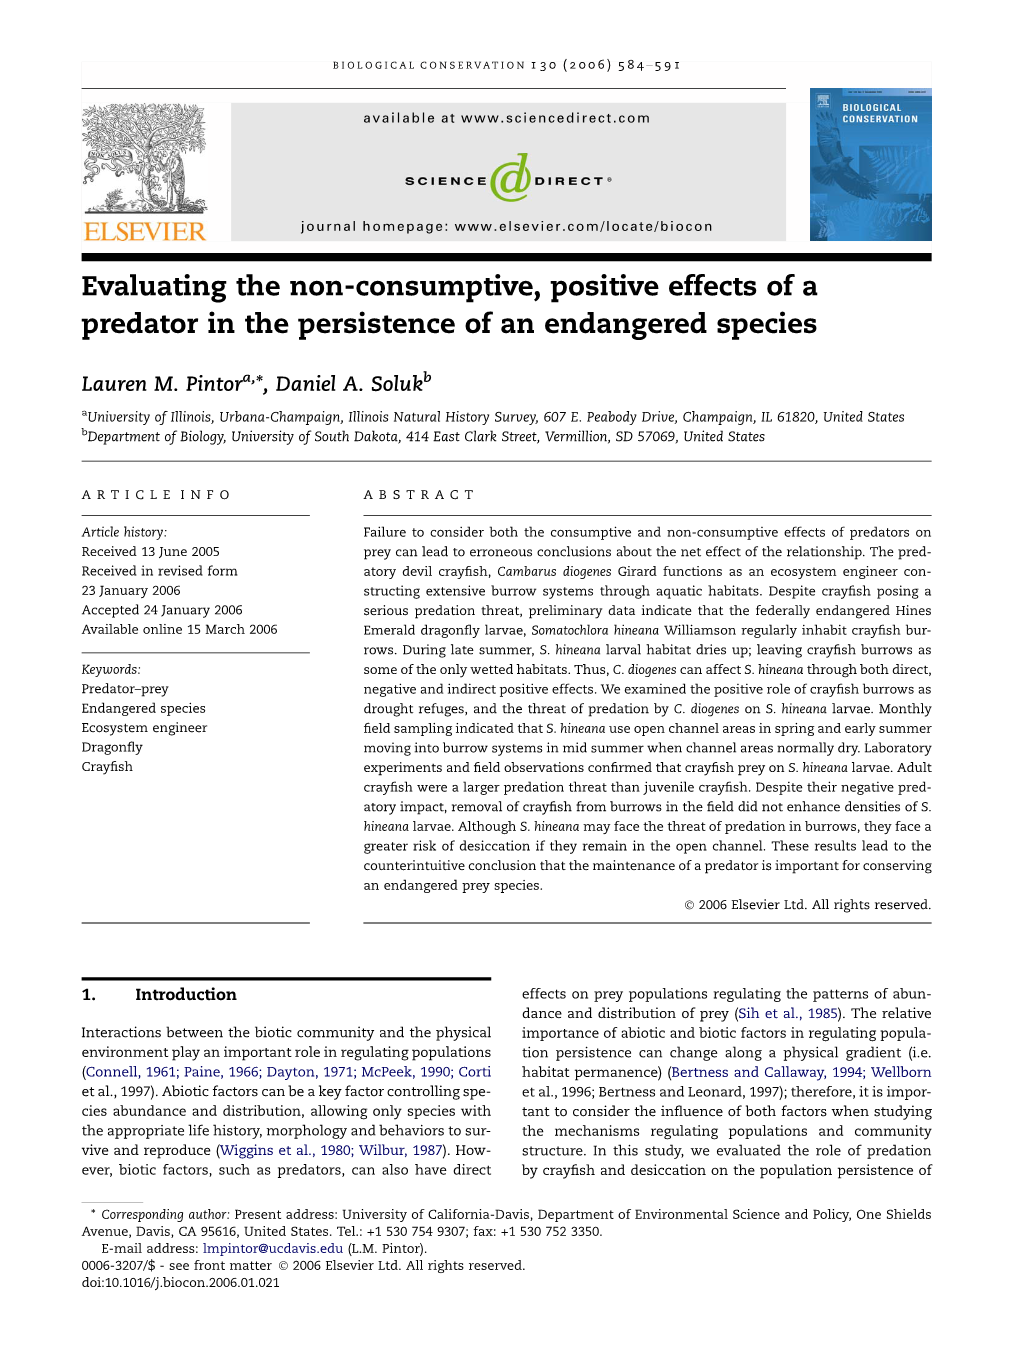 Evaluating the Non-Consumptive, Positive Effects of a Predator in the Persistence of an Endangered Species